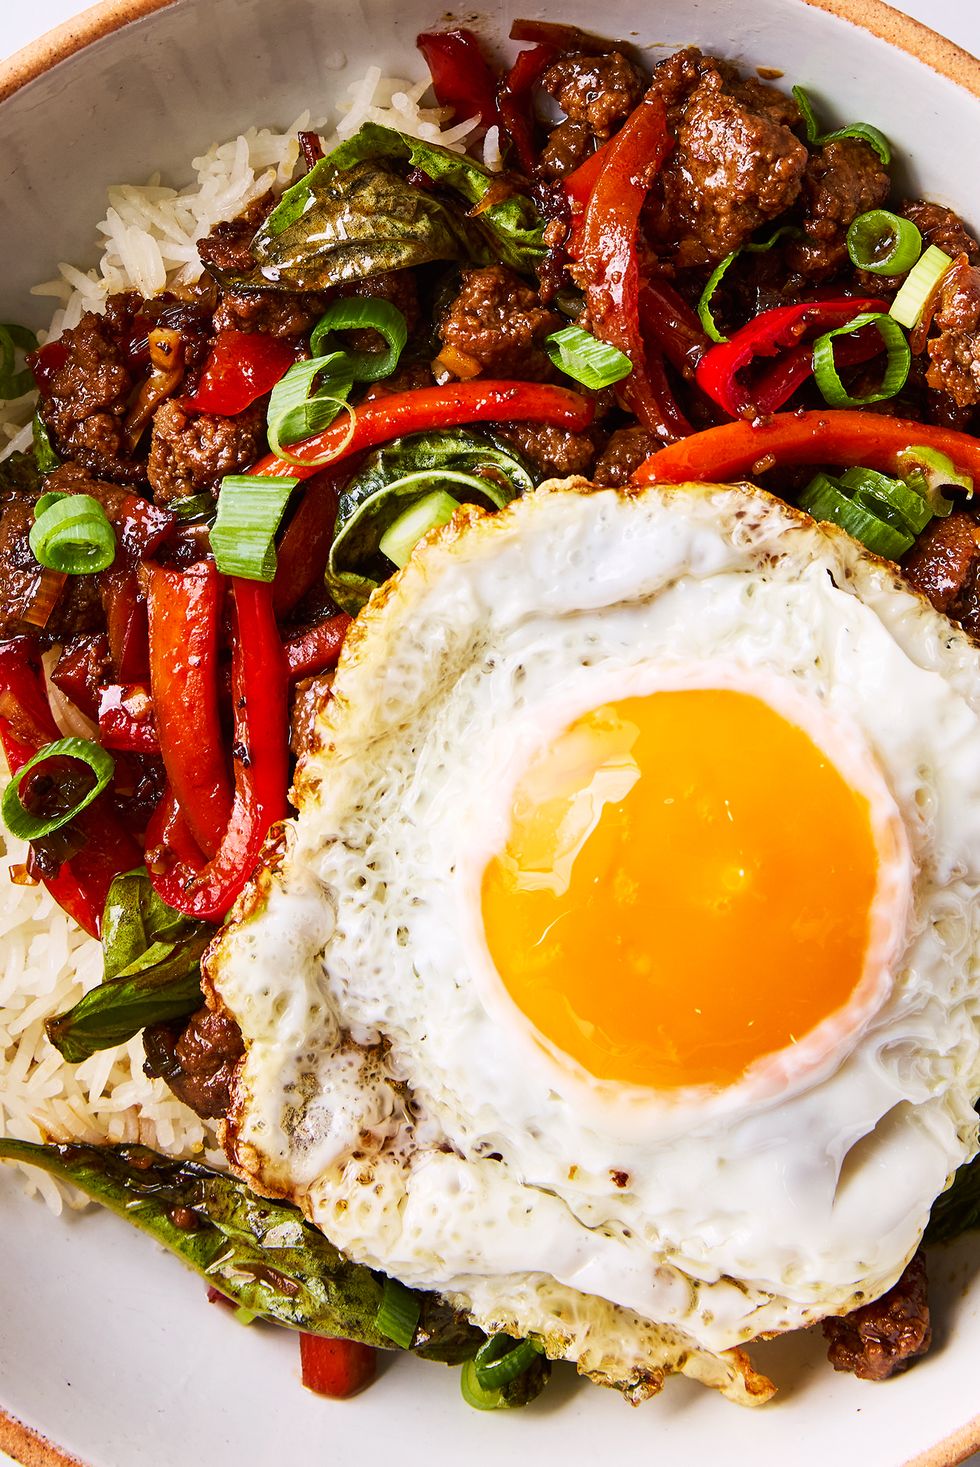 saucy, spicy, and slightly sweet ground beef tossed with peppers, fresh basil, garlic, and ginger served over white rice and topped with a runny fried egg